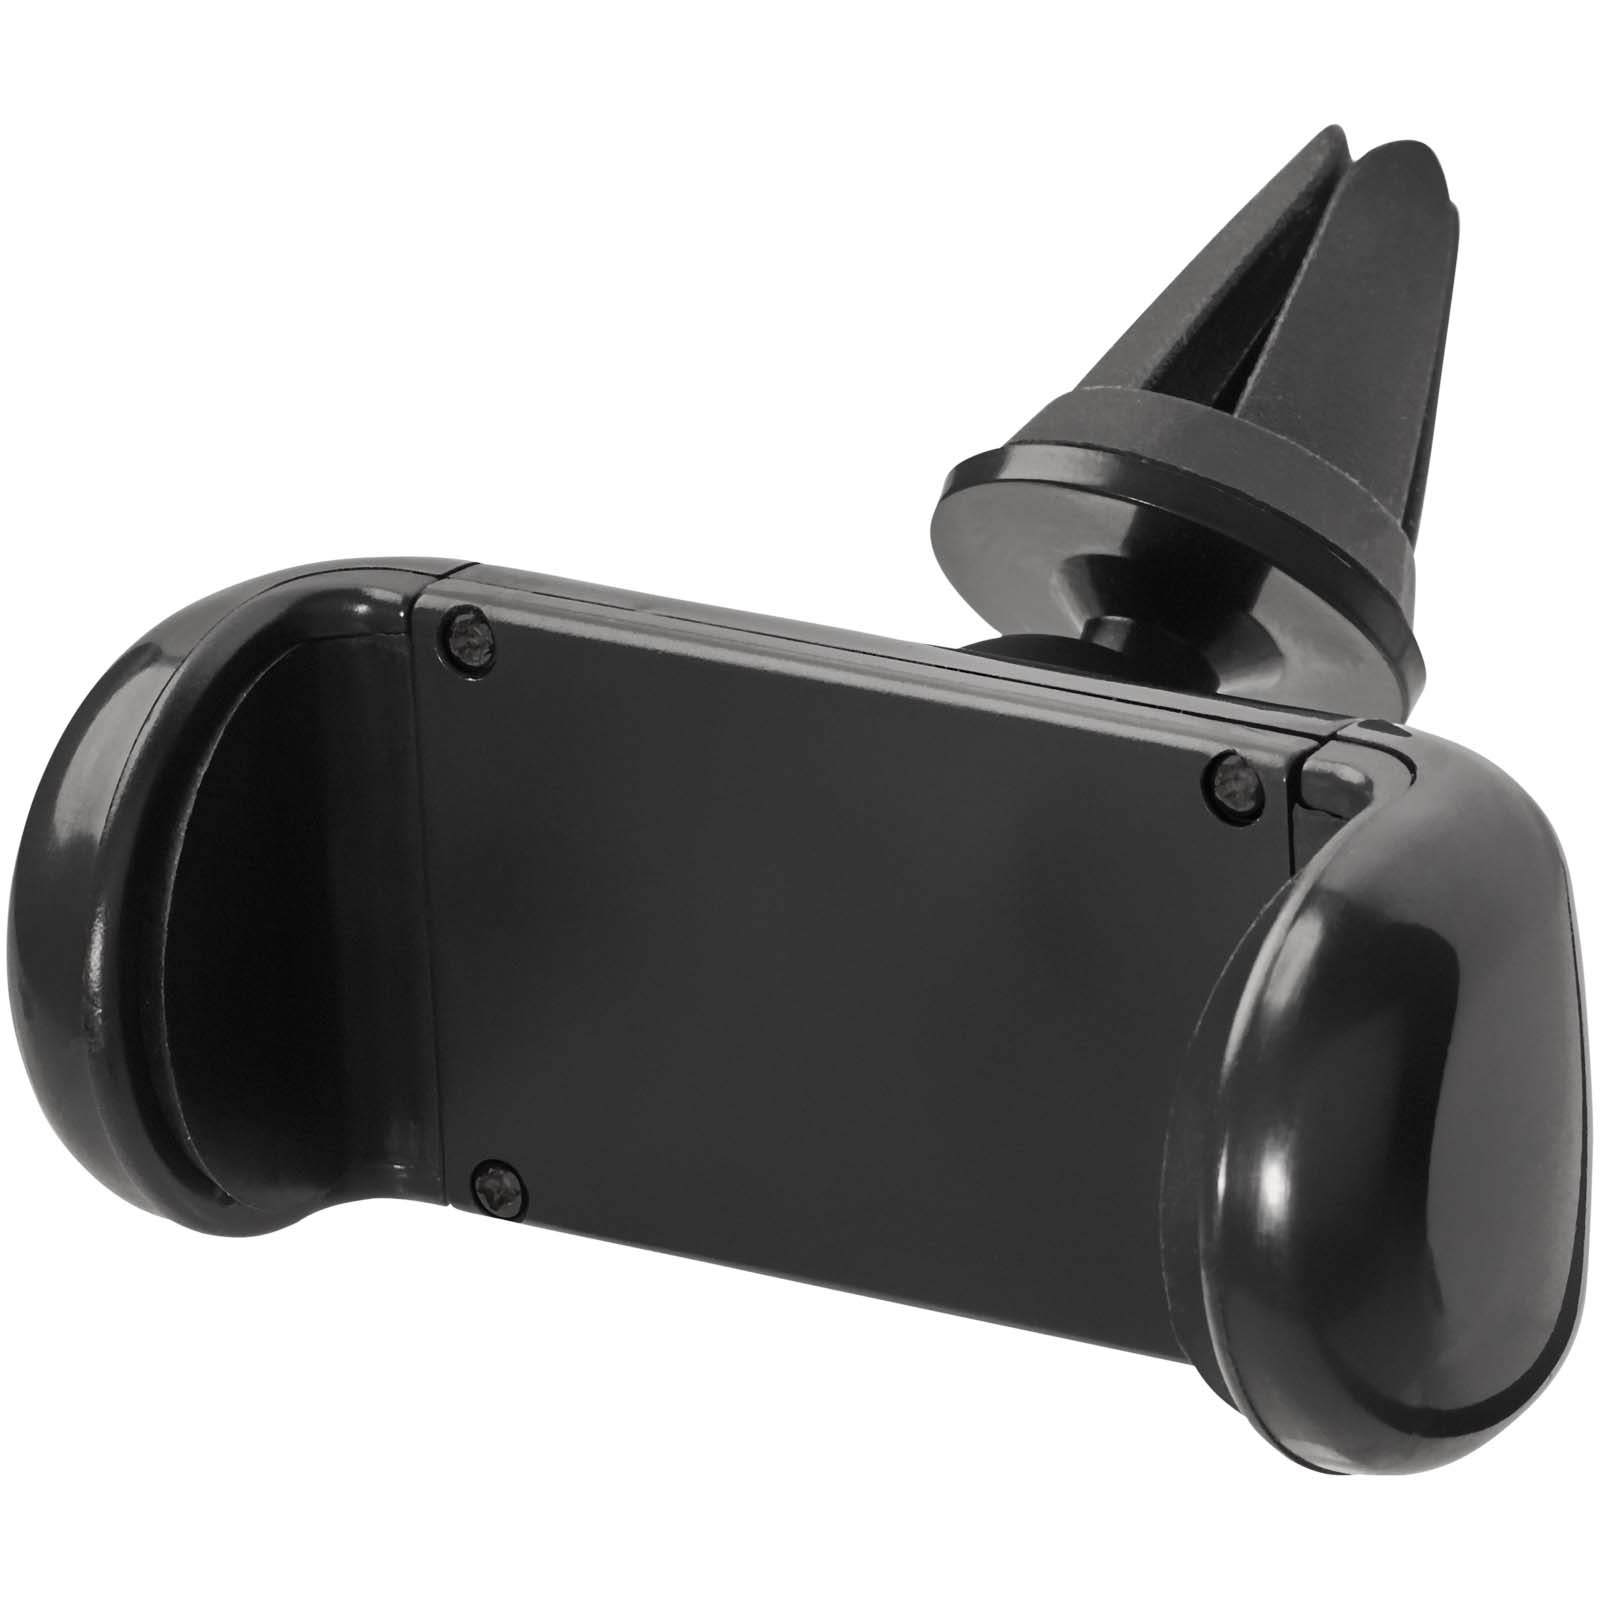 Telephone & Tablet Accessories - Grip car phone holder